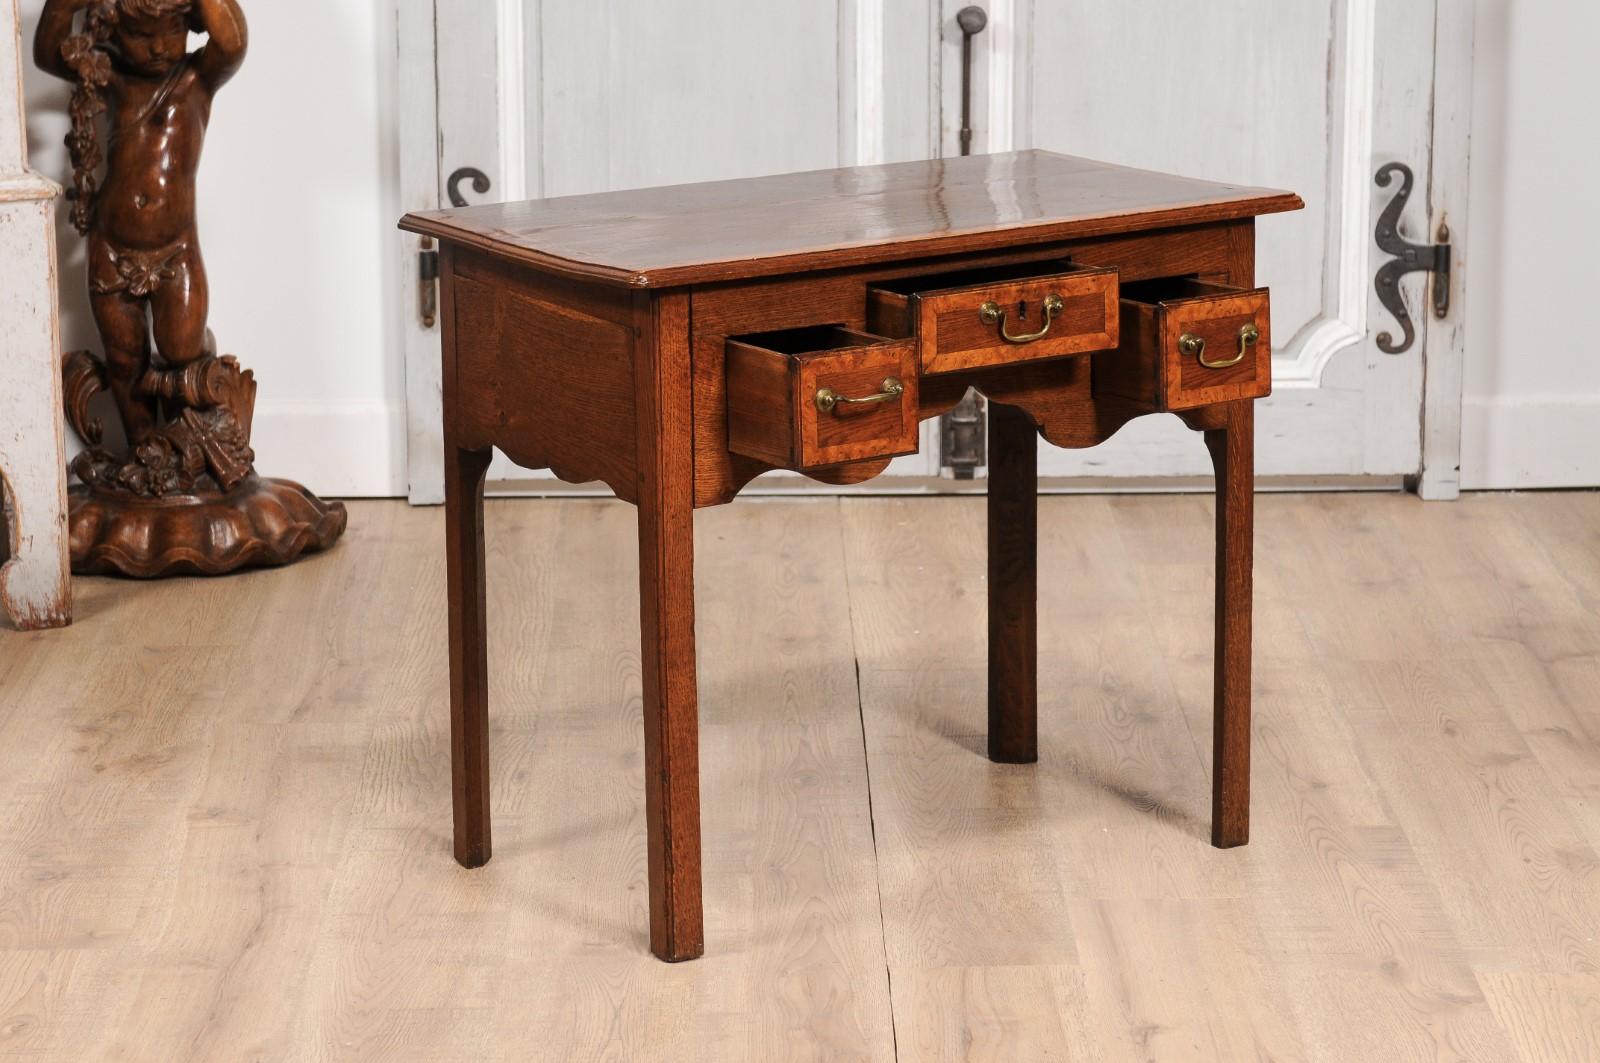 English Georgian Period 18th Century Oak Lowboy Side Table with Carved Apron For Sale 2